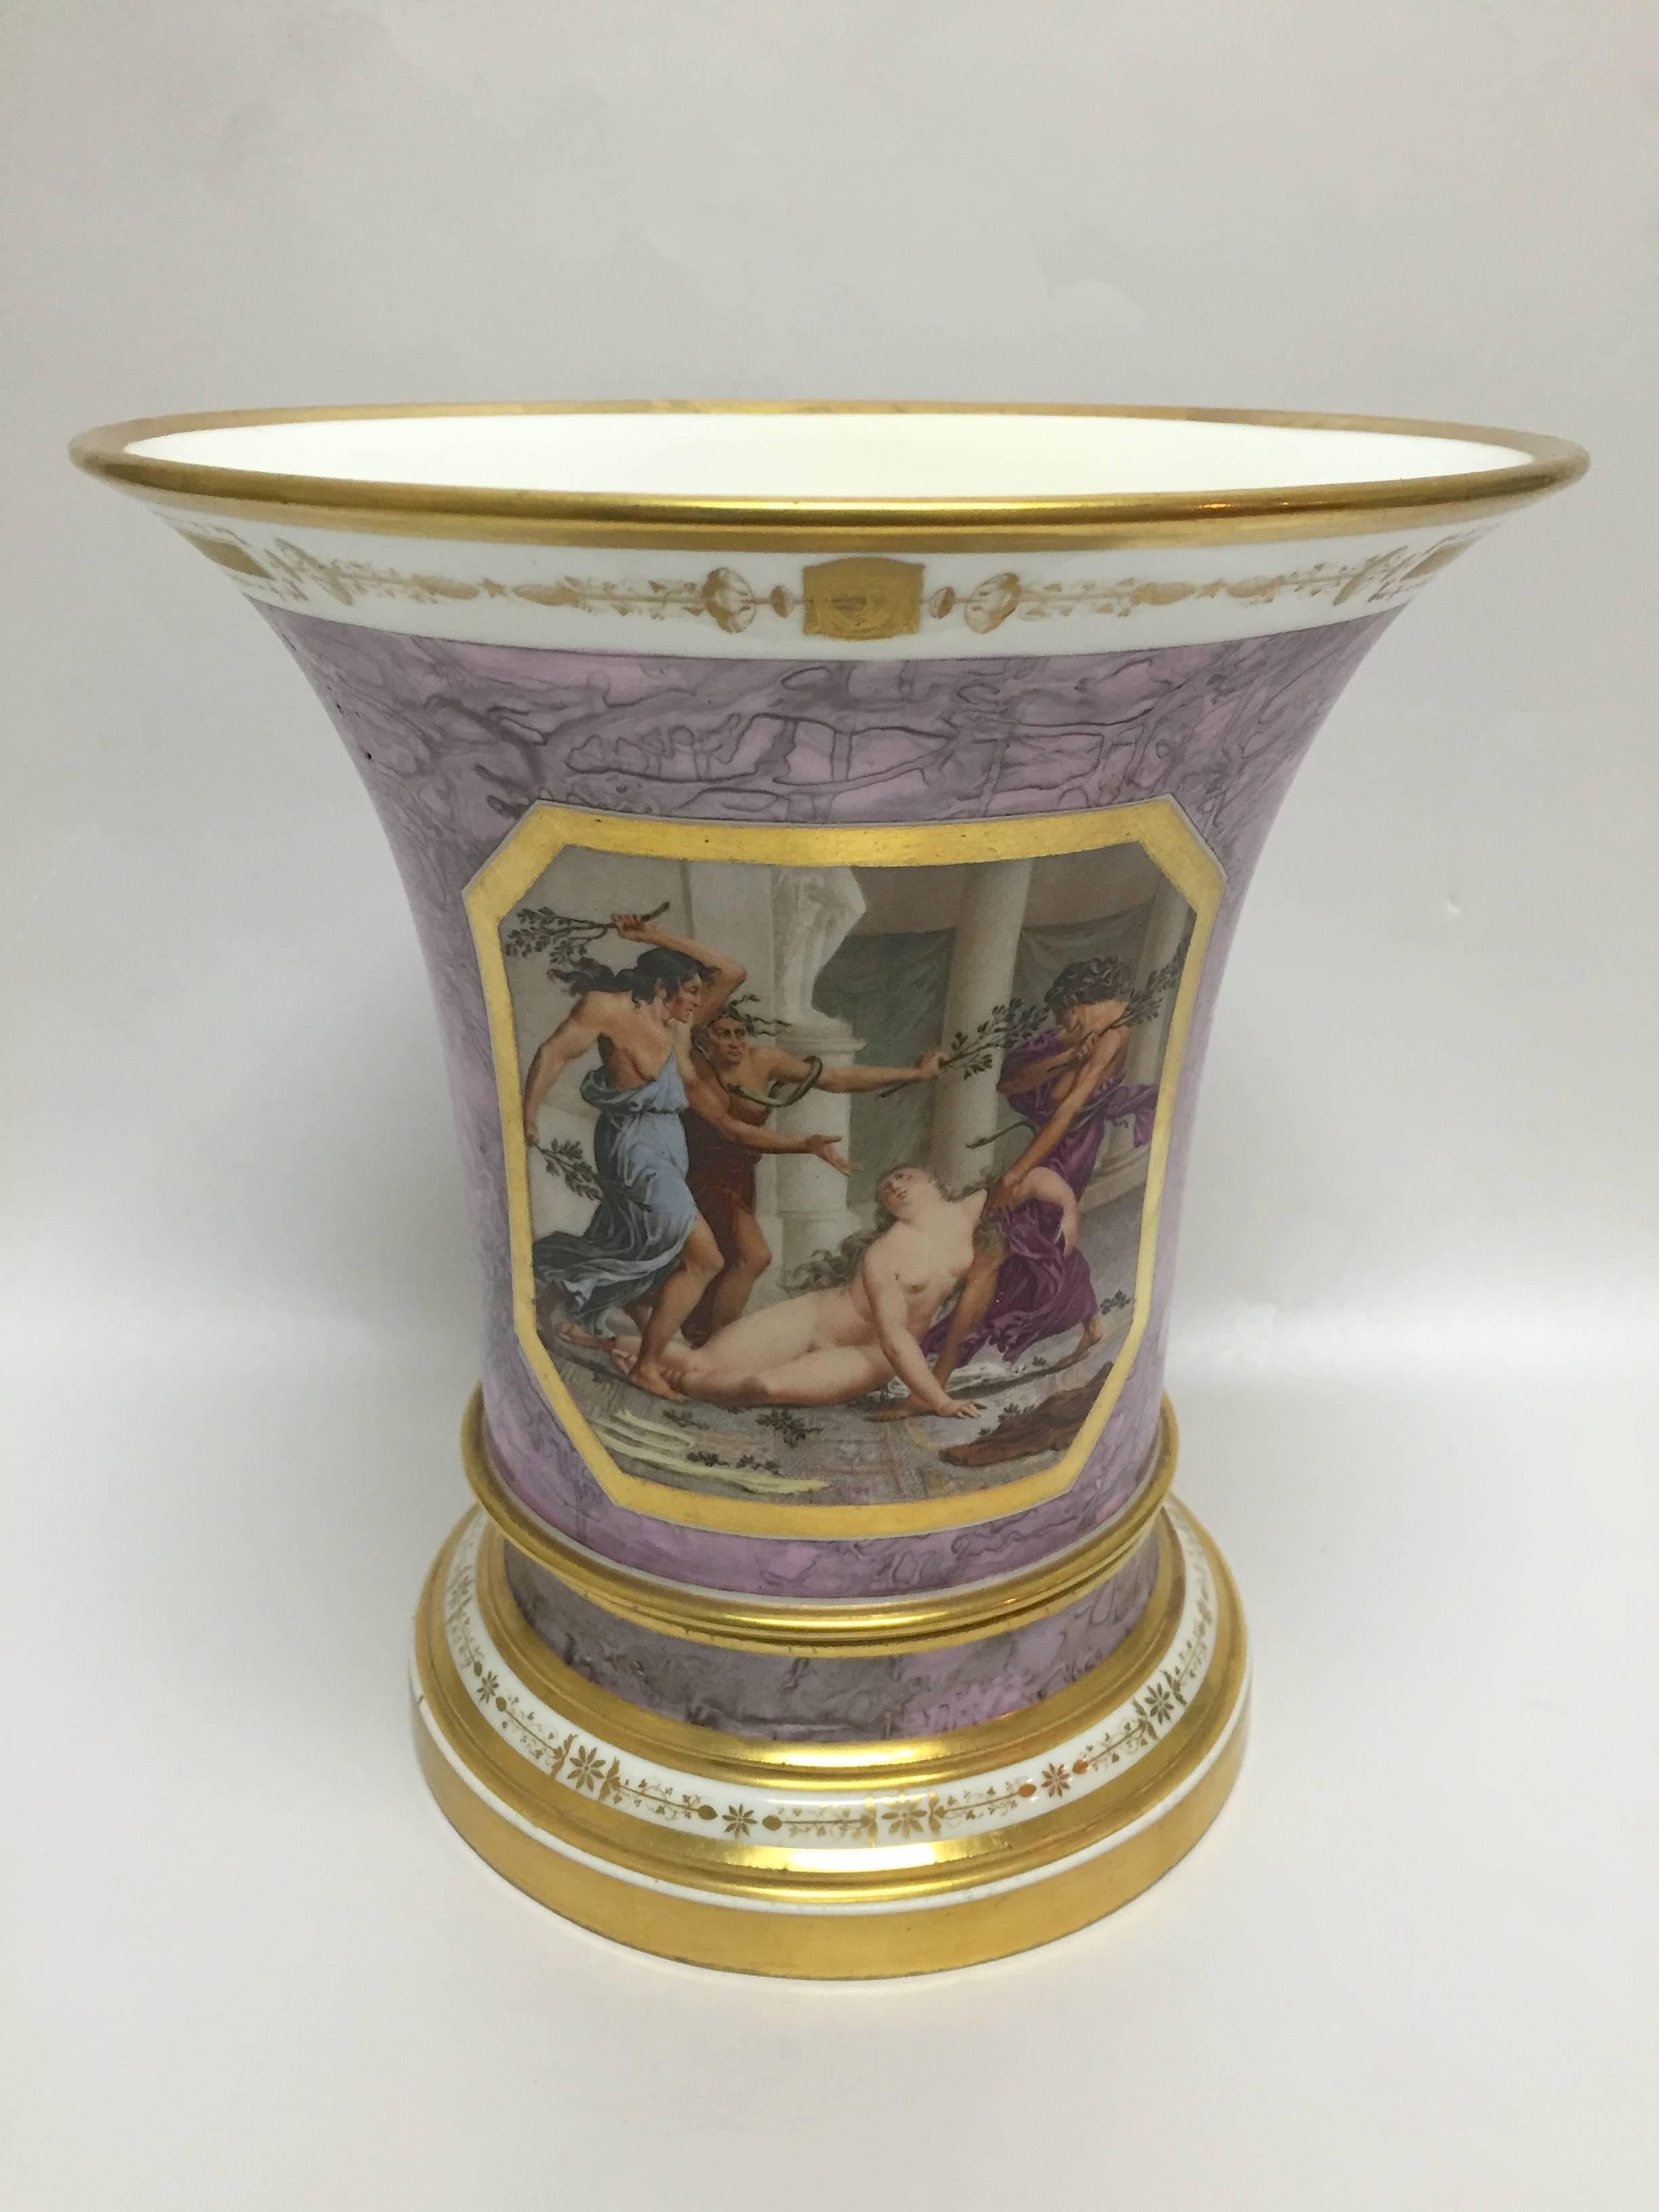 Period Vienna Porcelain Cachepots of the Highest Quality Early 19th Century For Sale 2